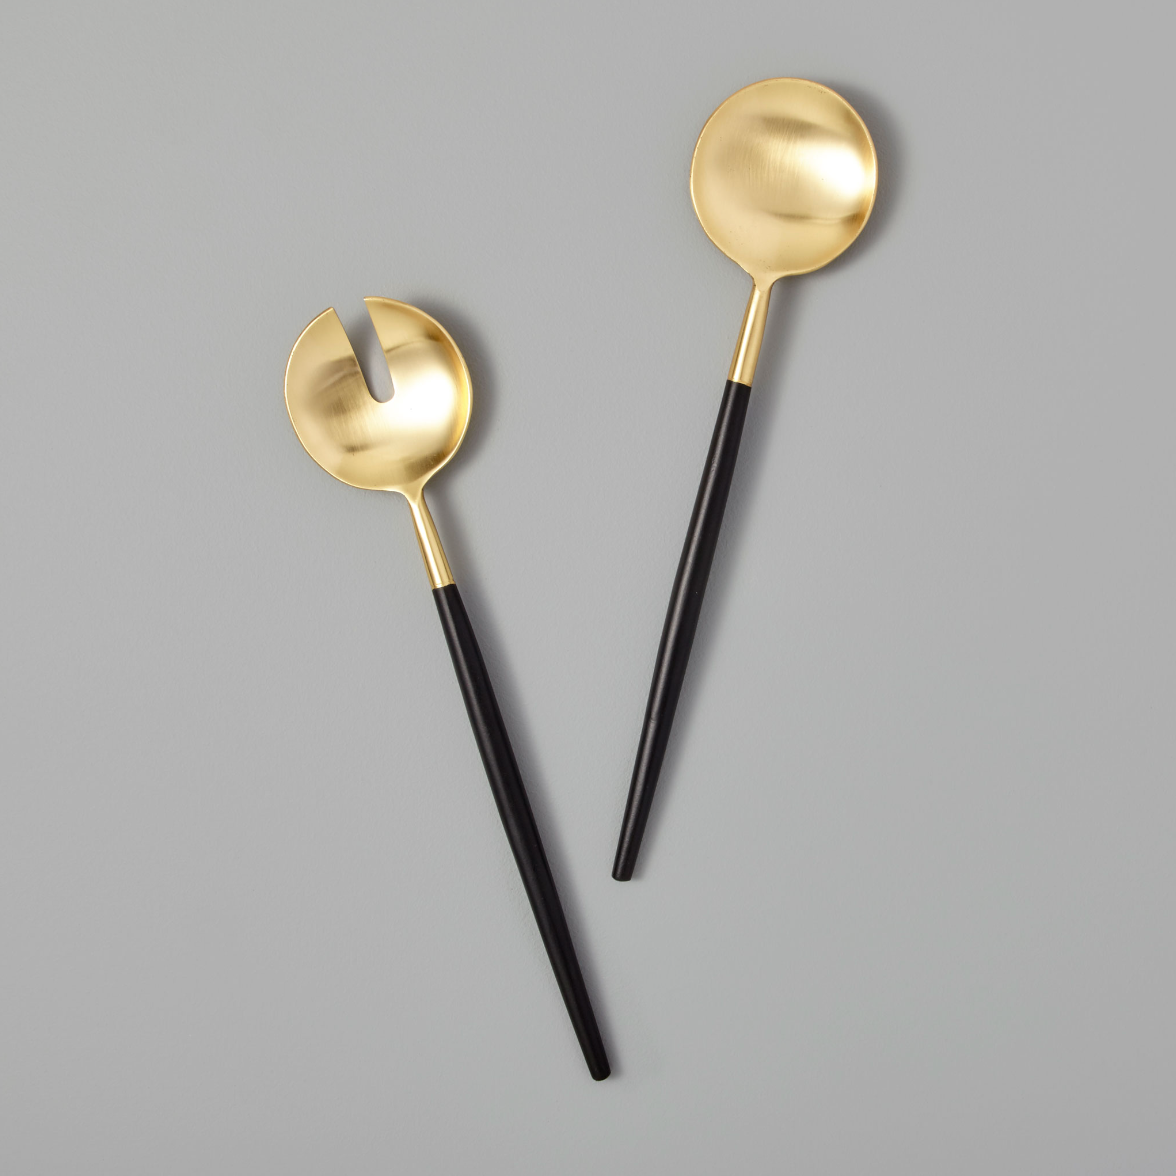 Serving Set in Black and Gold